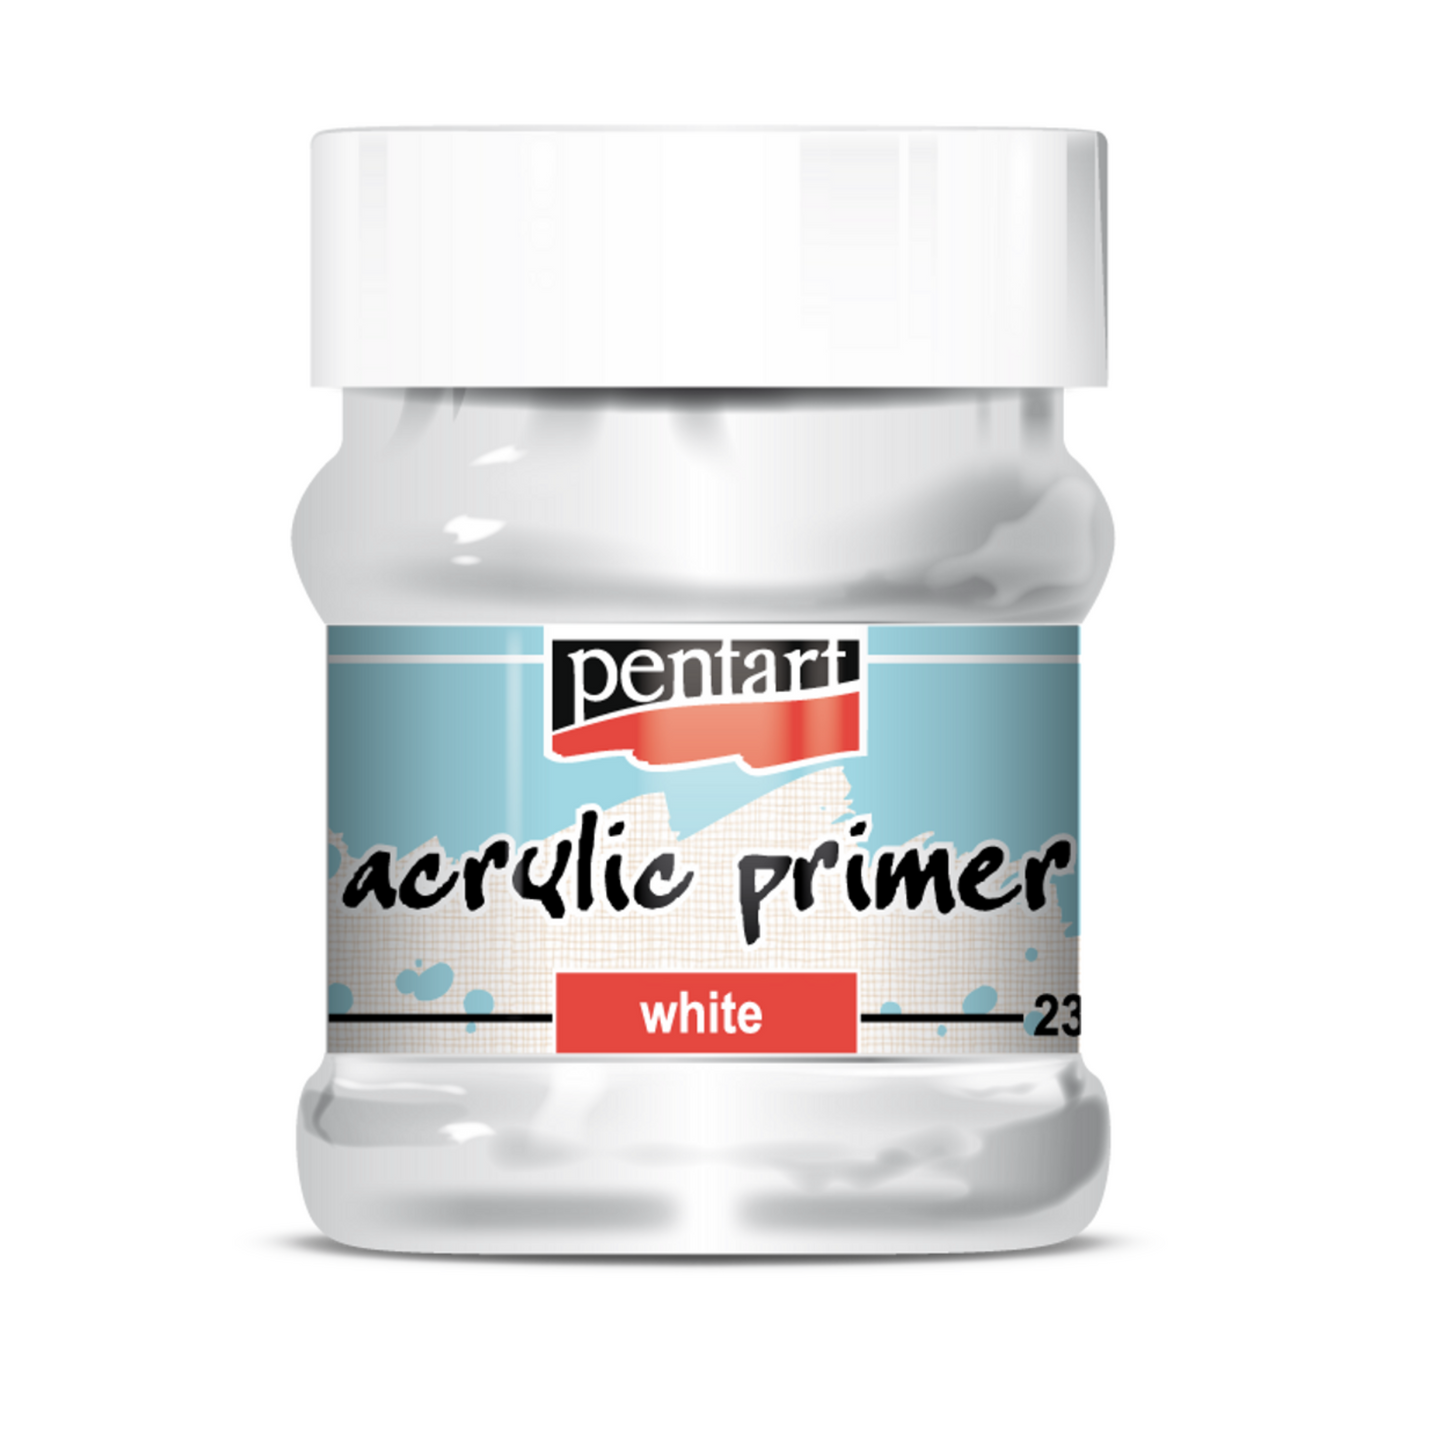 Acrylic Primer white 230 ml by Pentart. Available at Milton's Daughter.